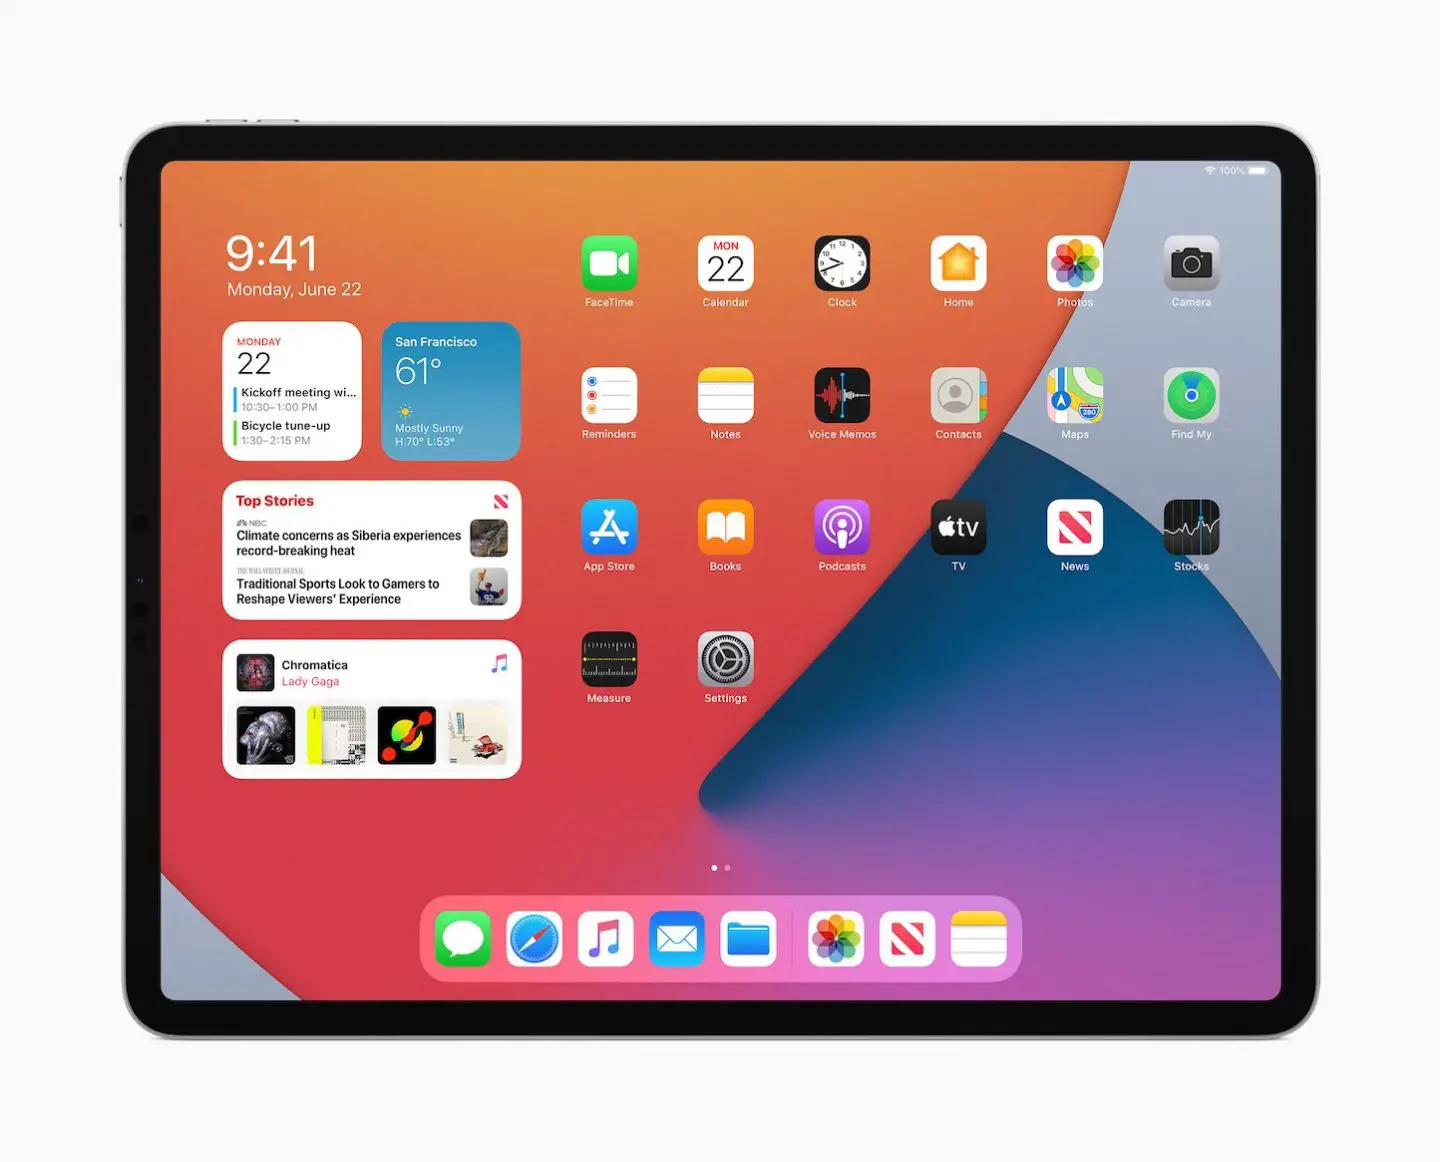 iOS and iPadOS 15 will feature significant changes to notifications, home screen